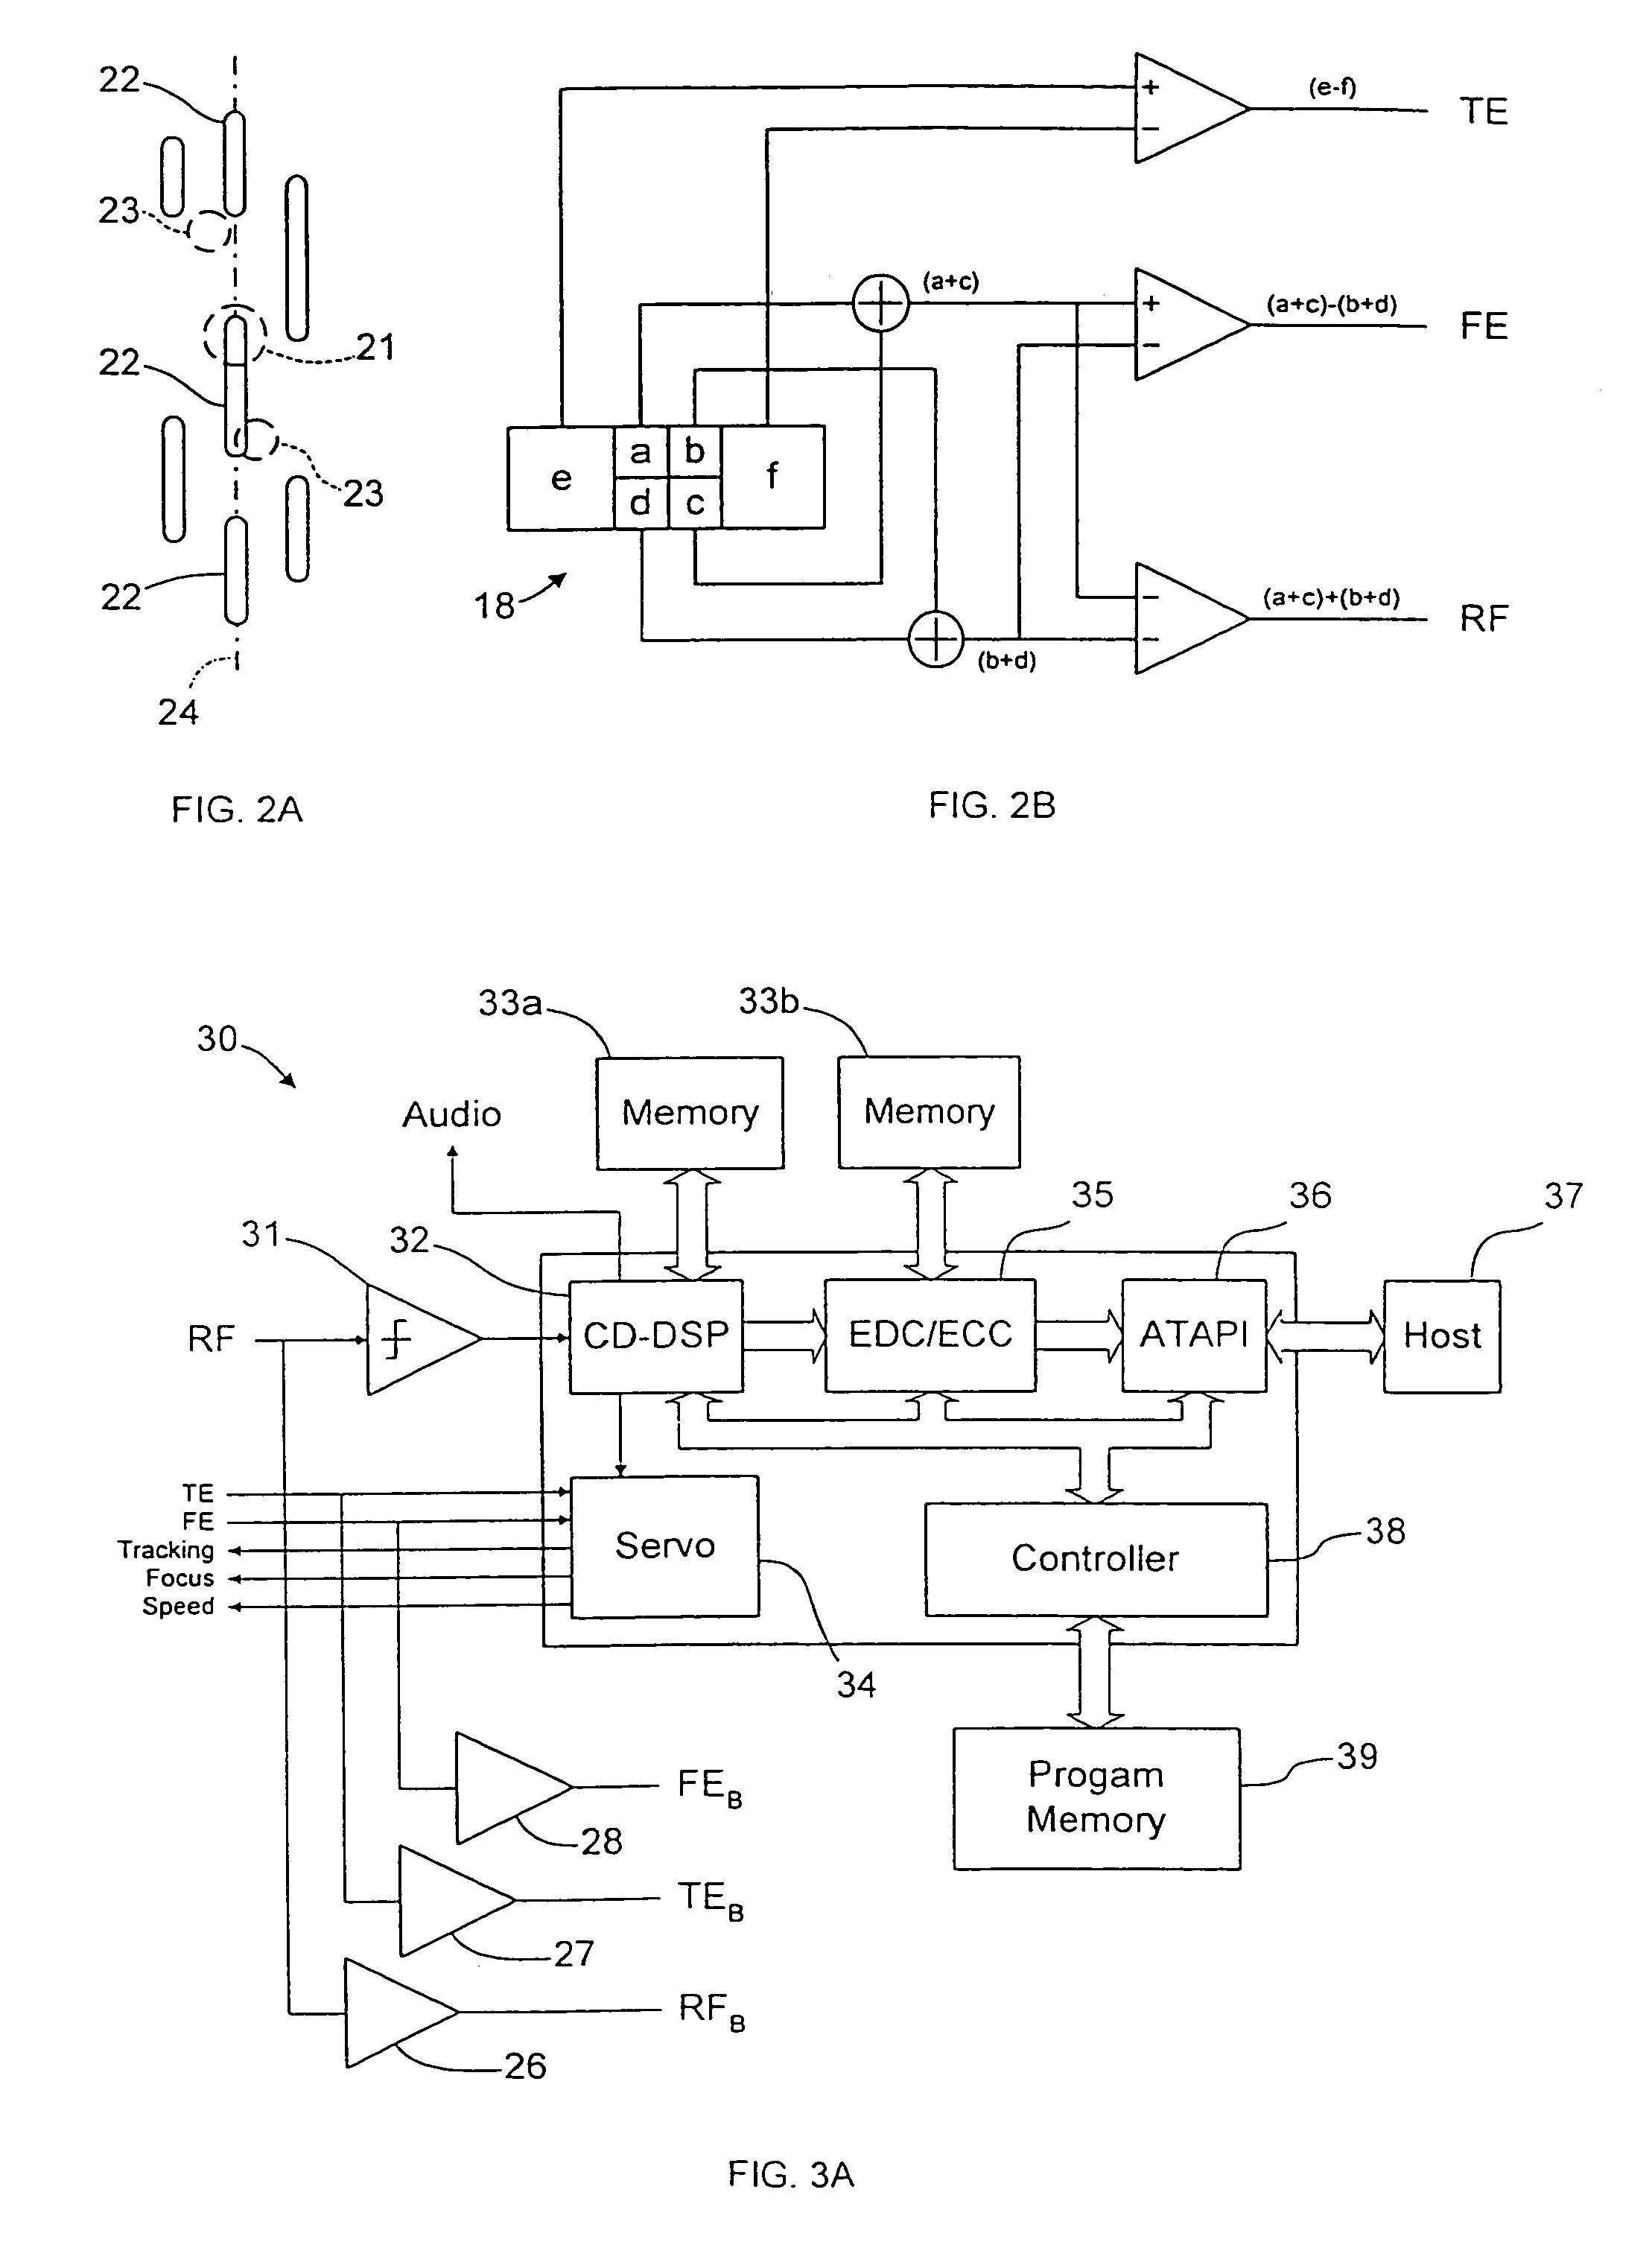 Trackable optical discs with concurrently readable nonoperational features